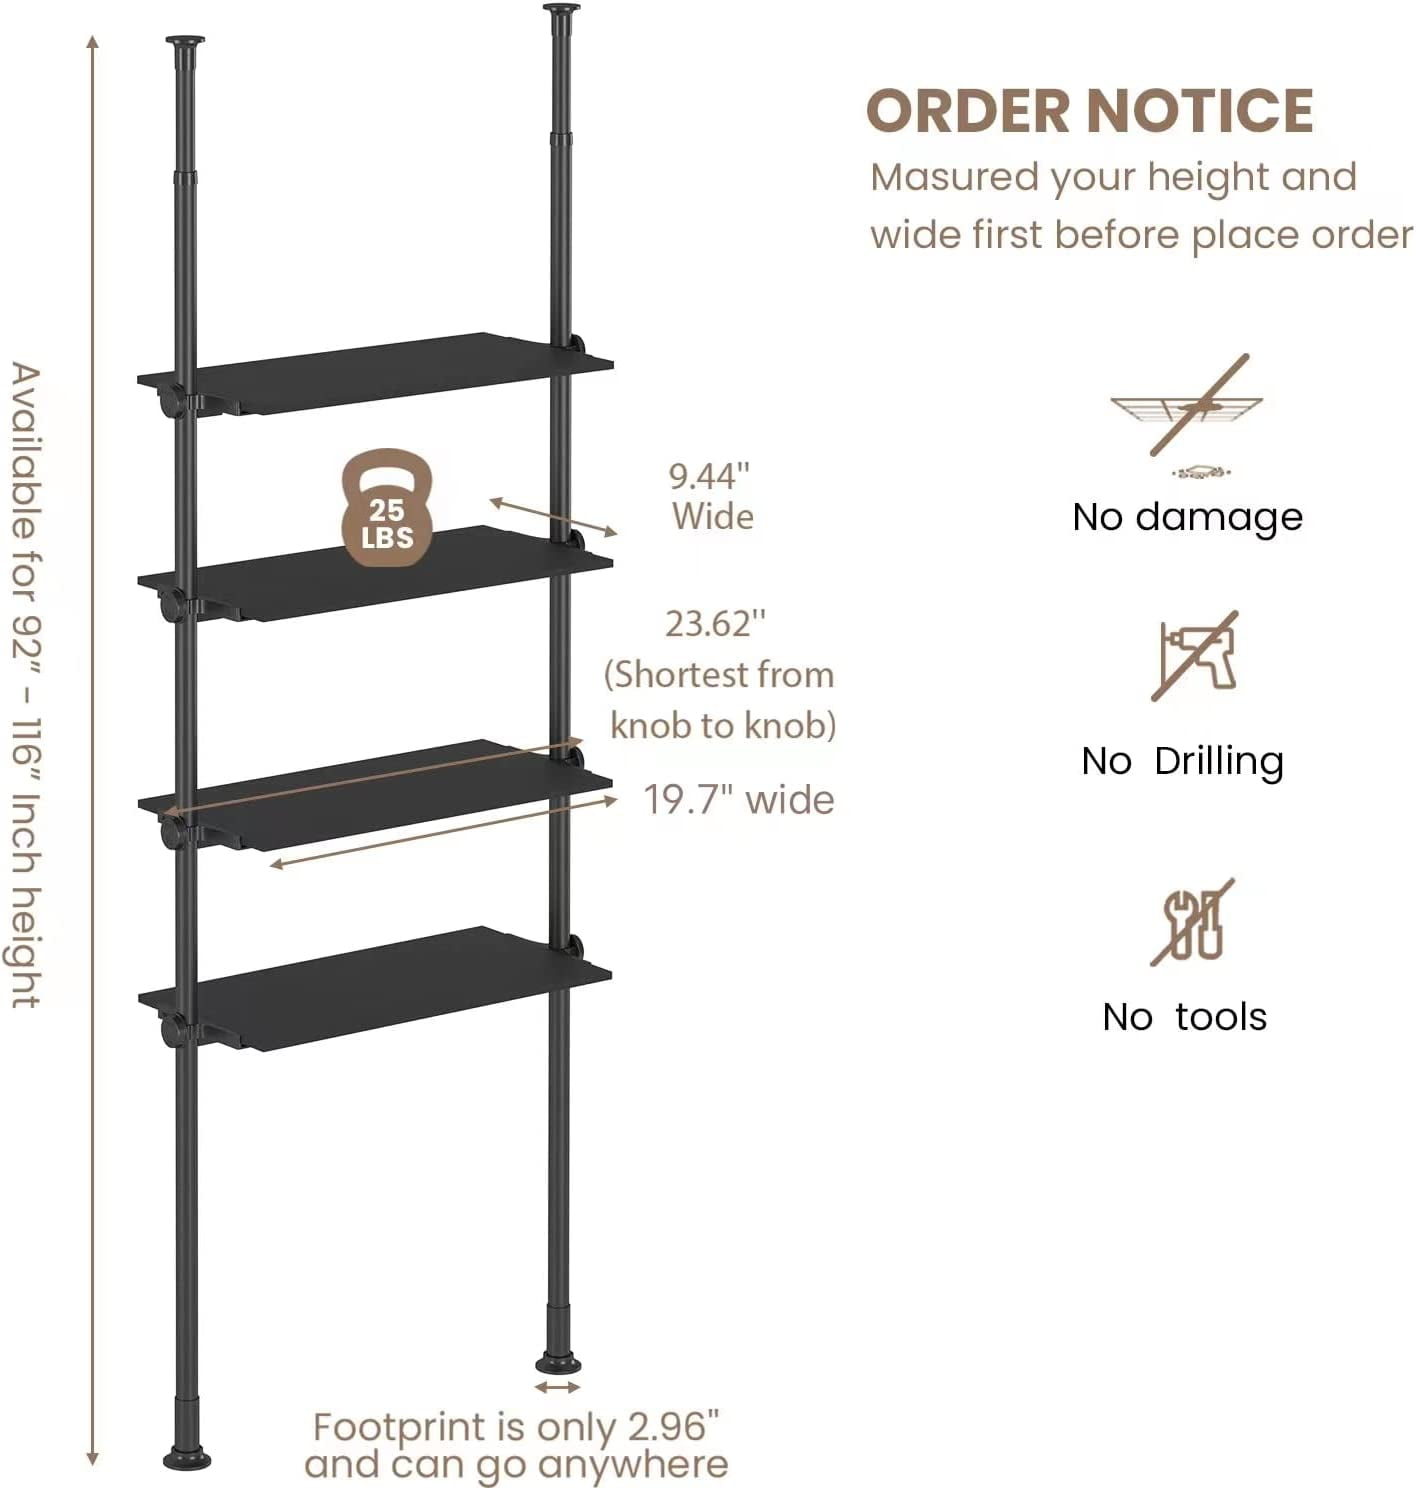 Lilyvane 4 Tiers Over Toilet Storage, 97 to116” Adjustable Tension Pole  Over Toilet Bathroom Organizer, Standing Bathroom Shelves Over Toilet for